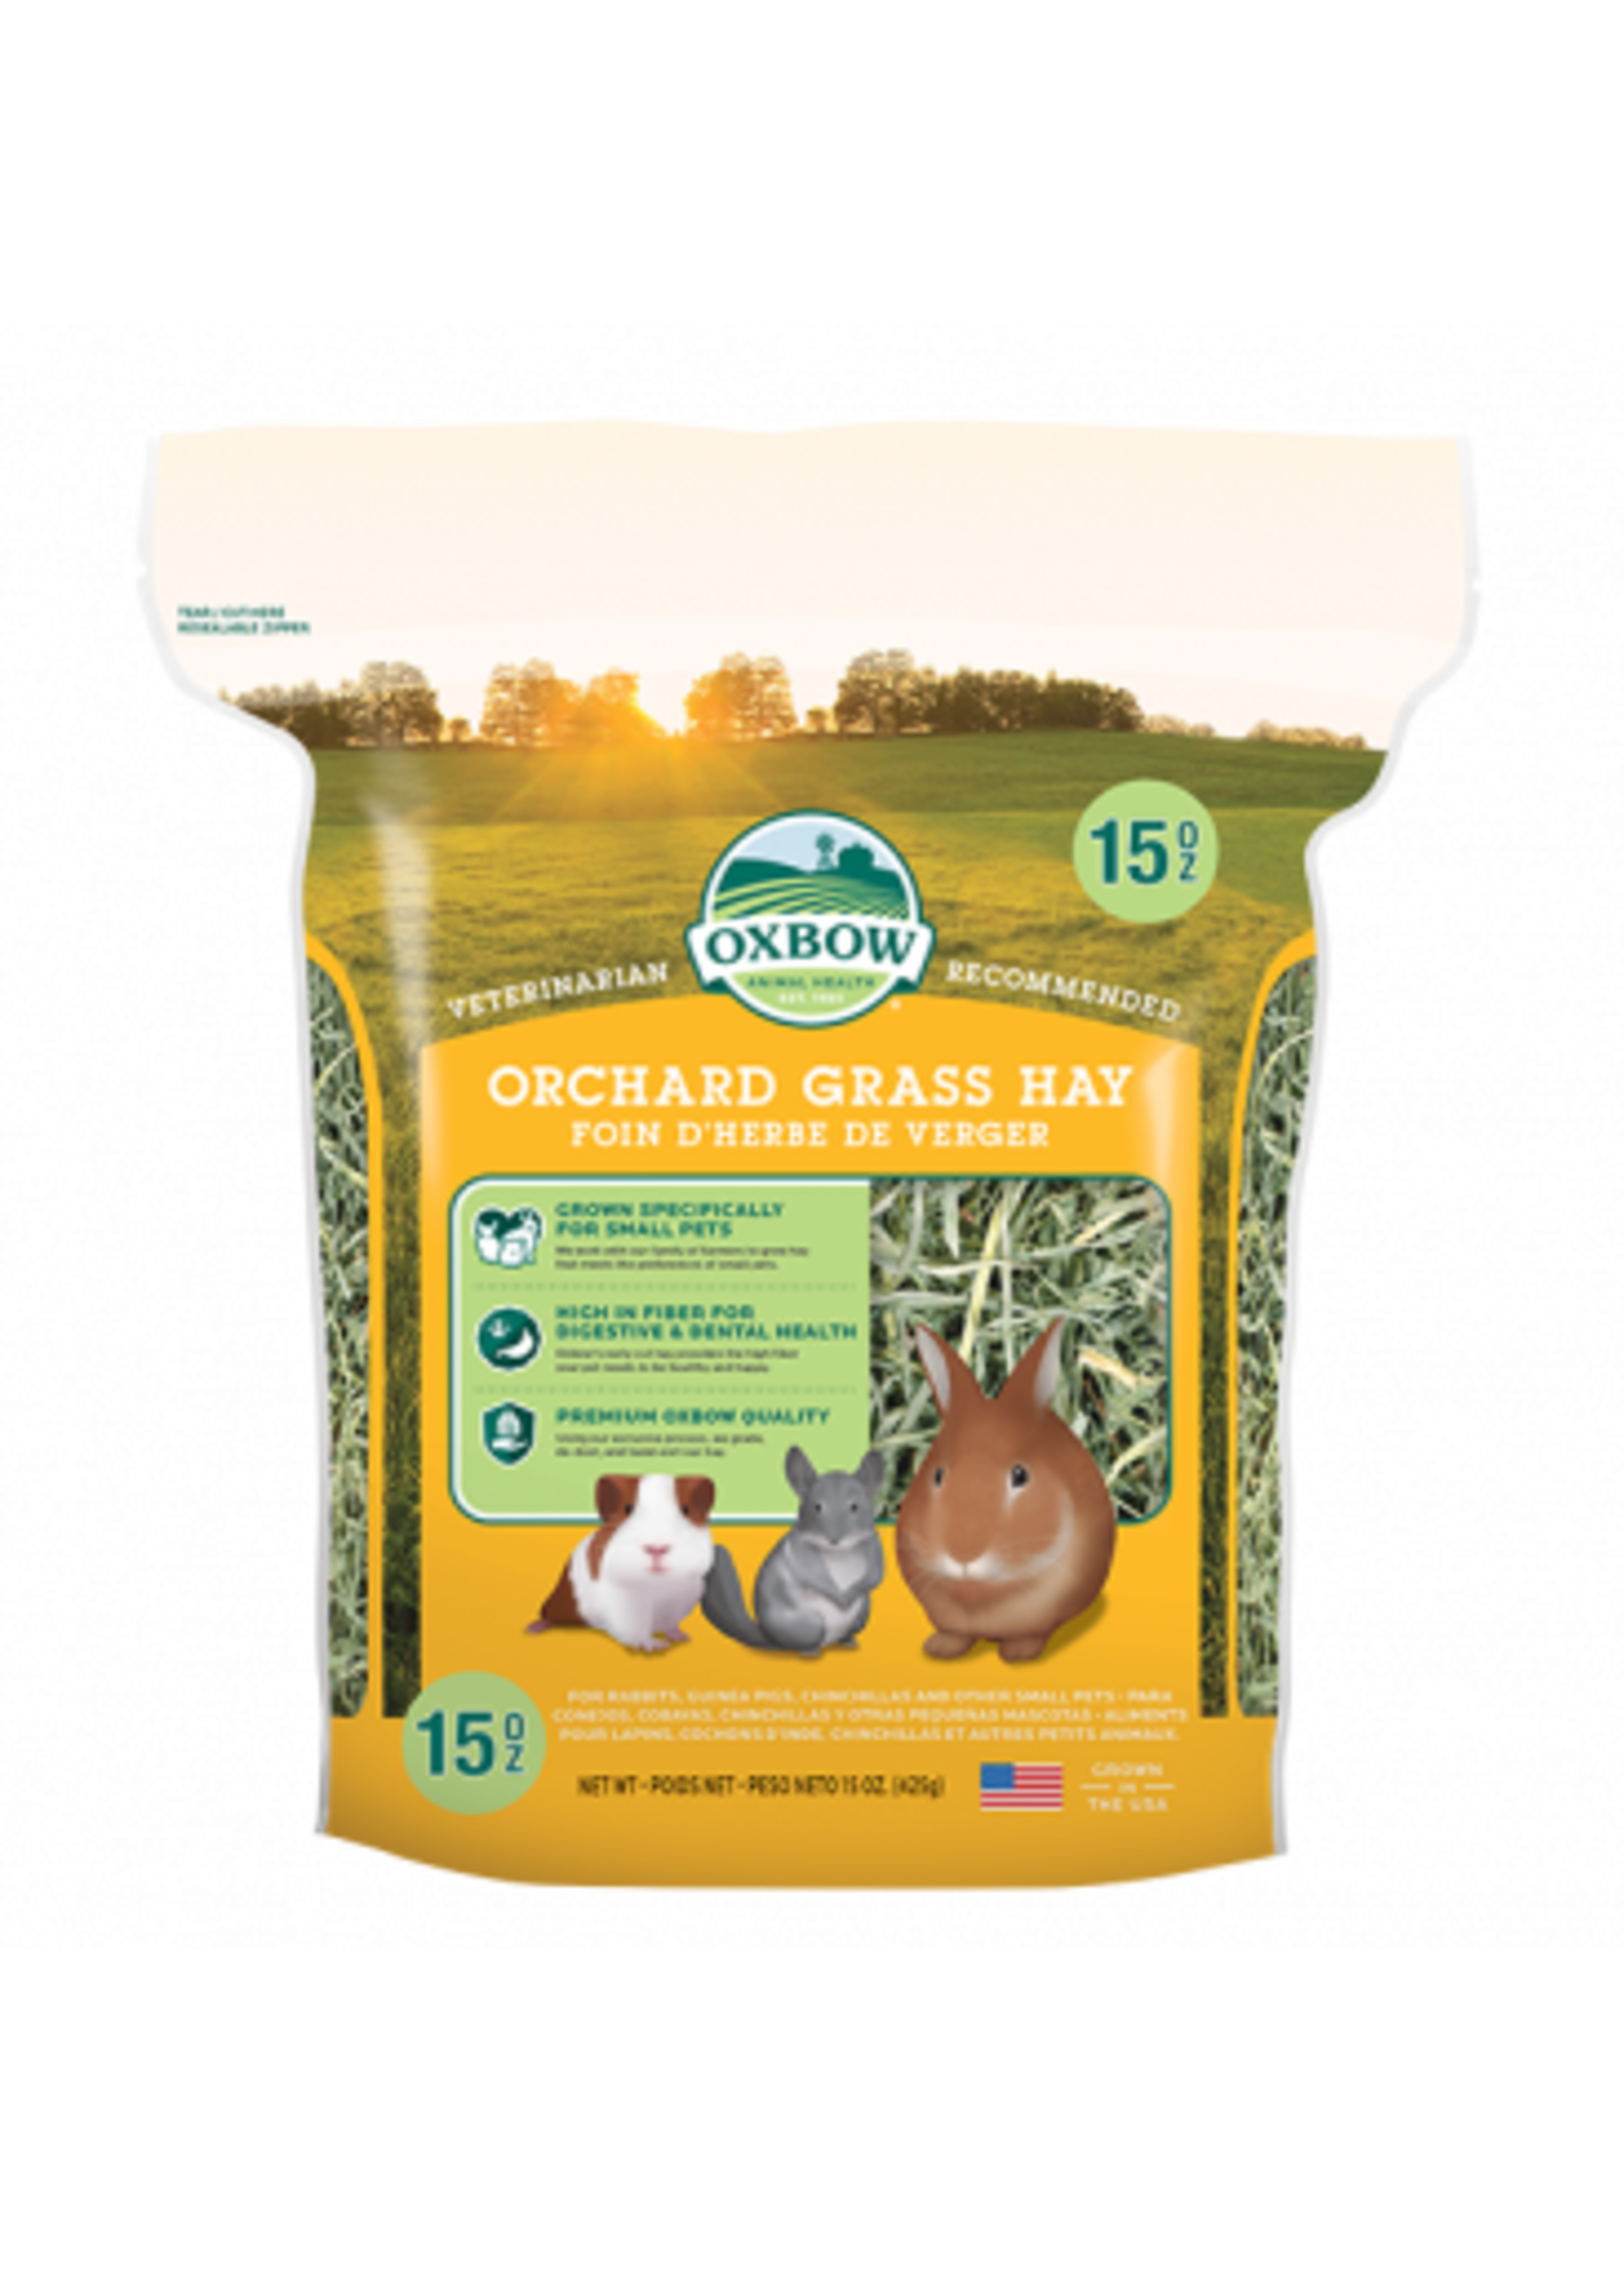 Oxbow Orchard Grass 15 oz